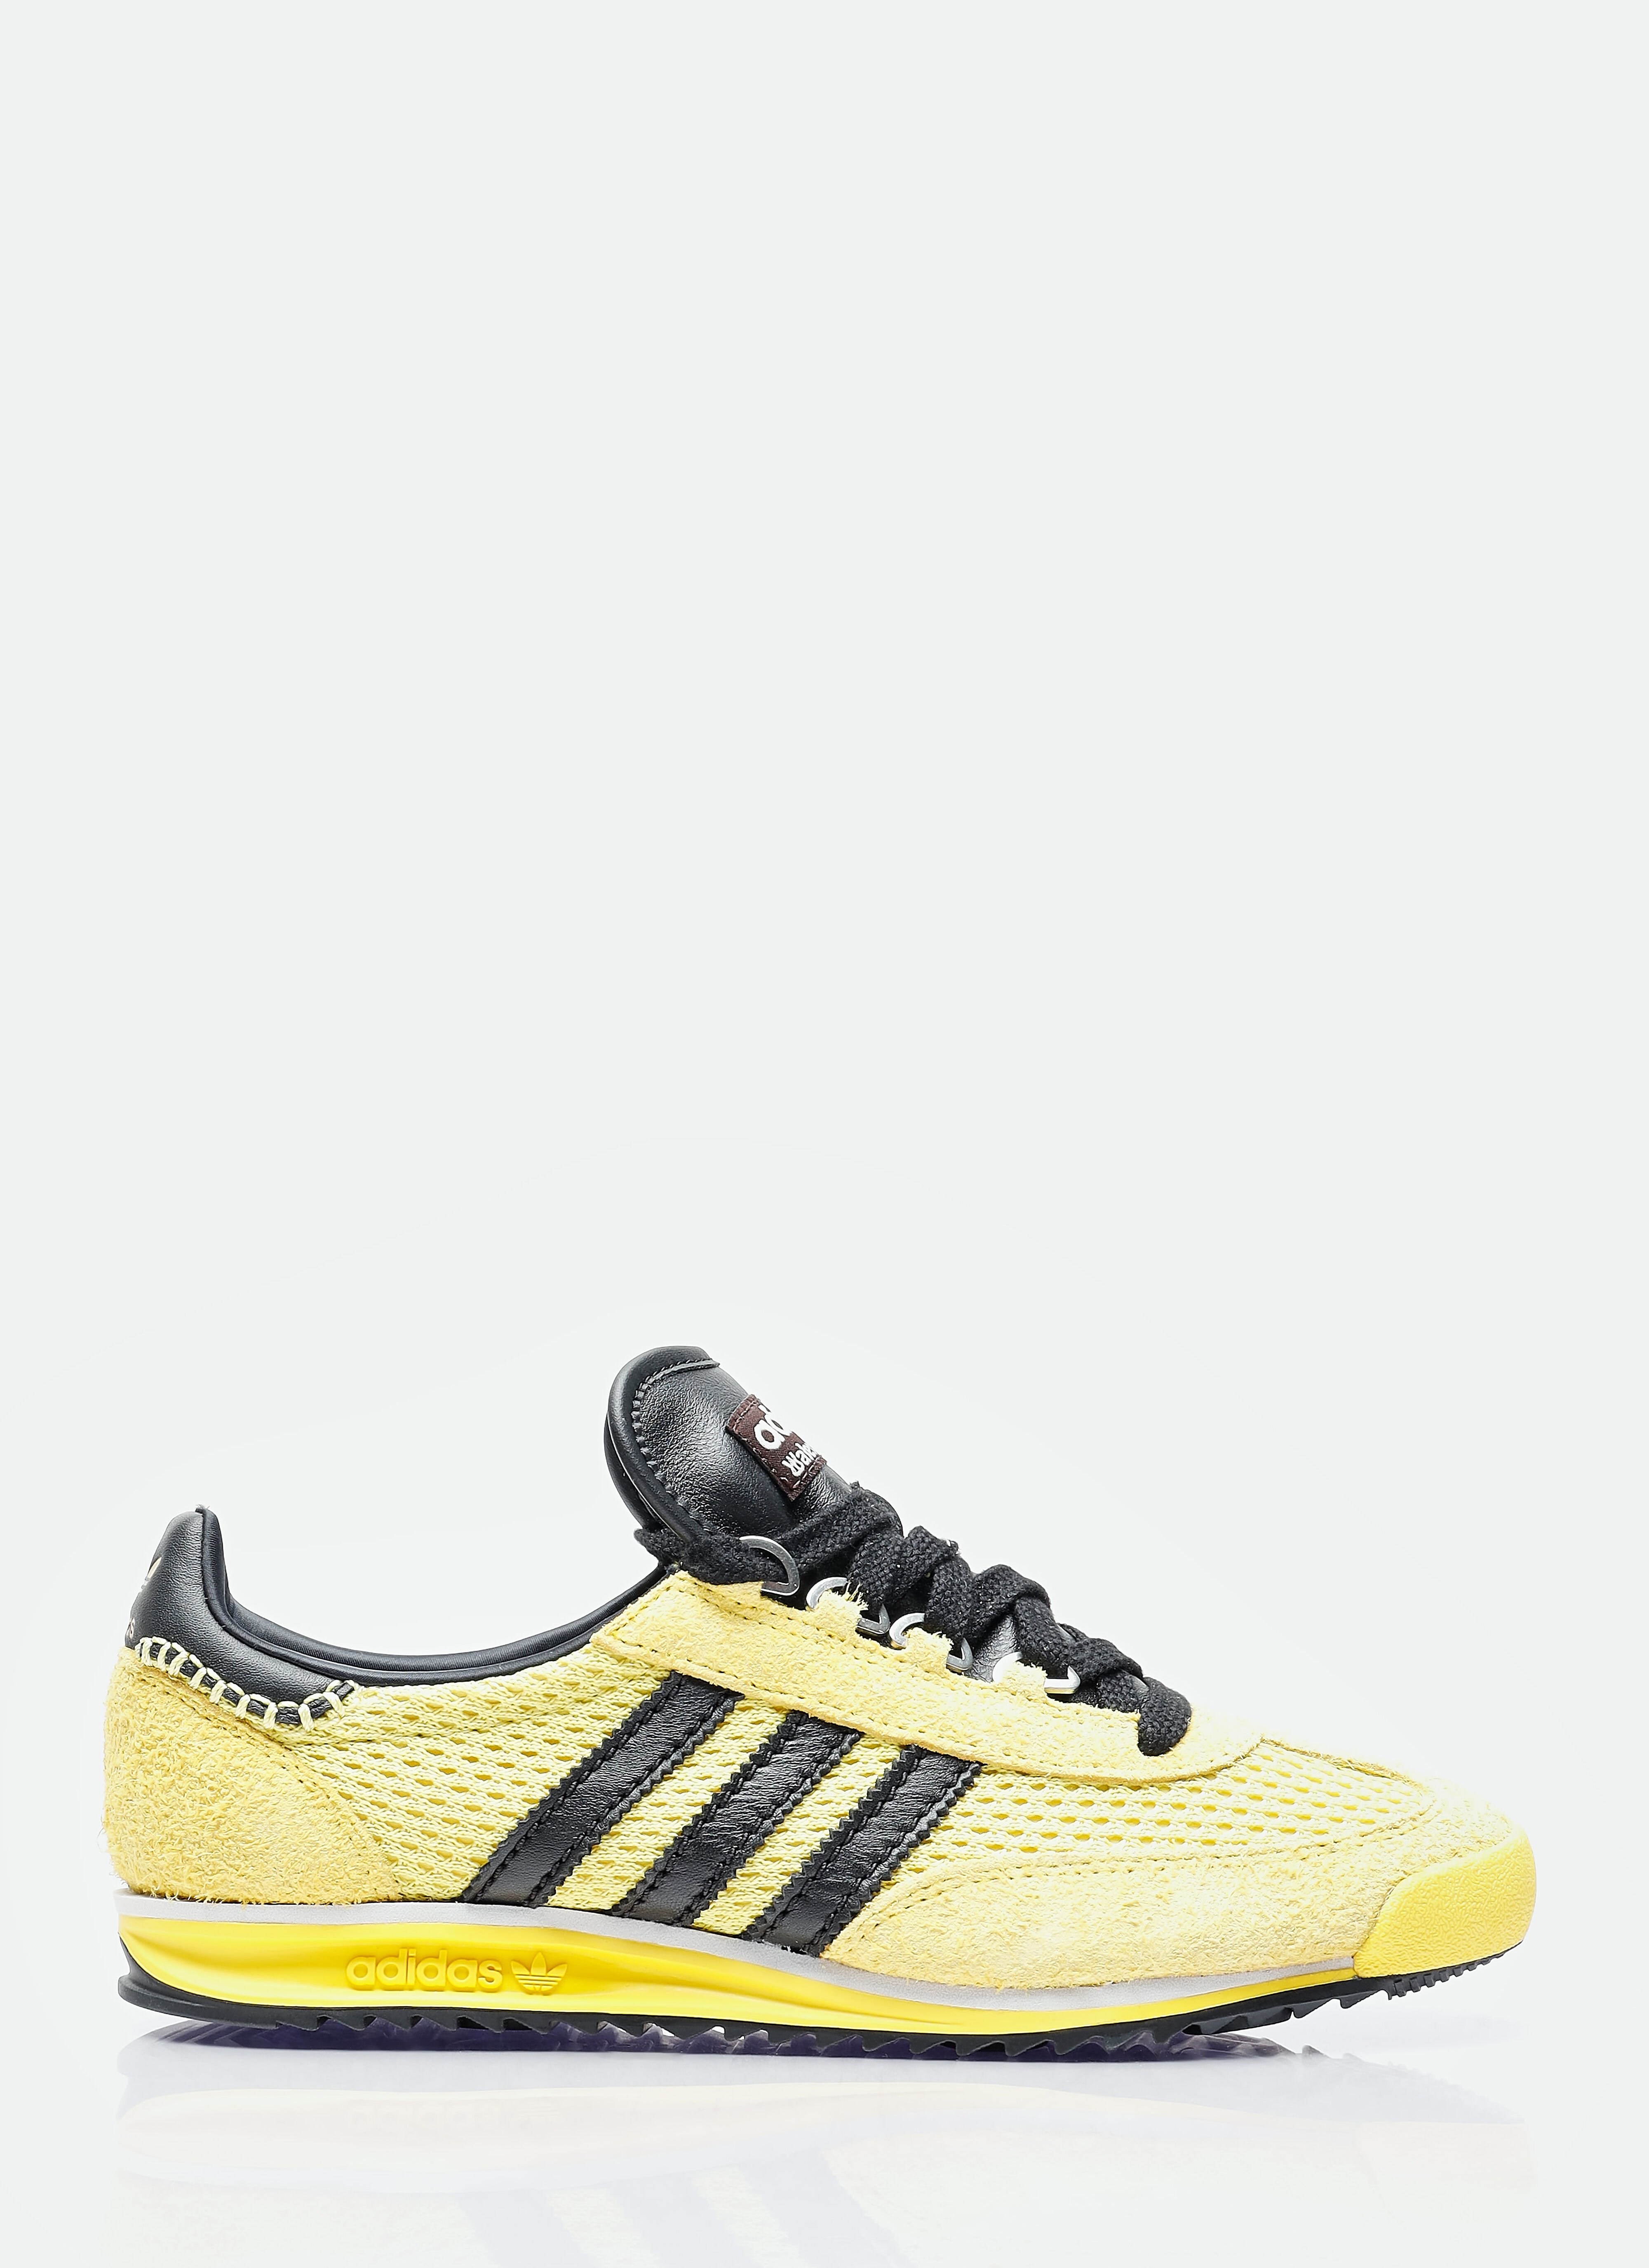 adidas by Wales Bonner SL76 스니커즈 옐로우 awb0357010